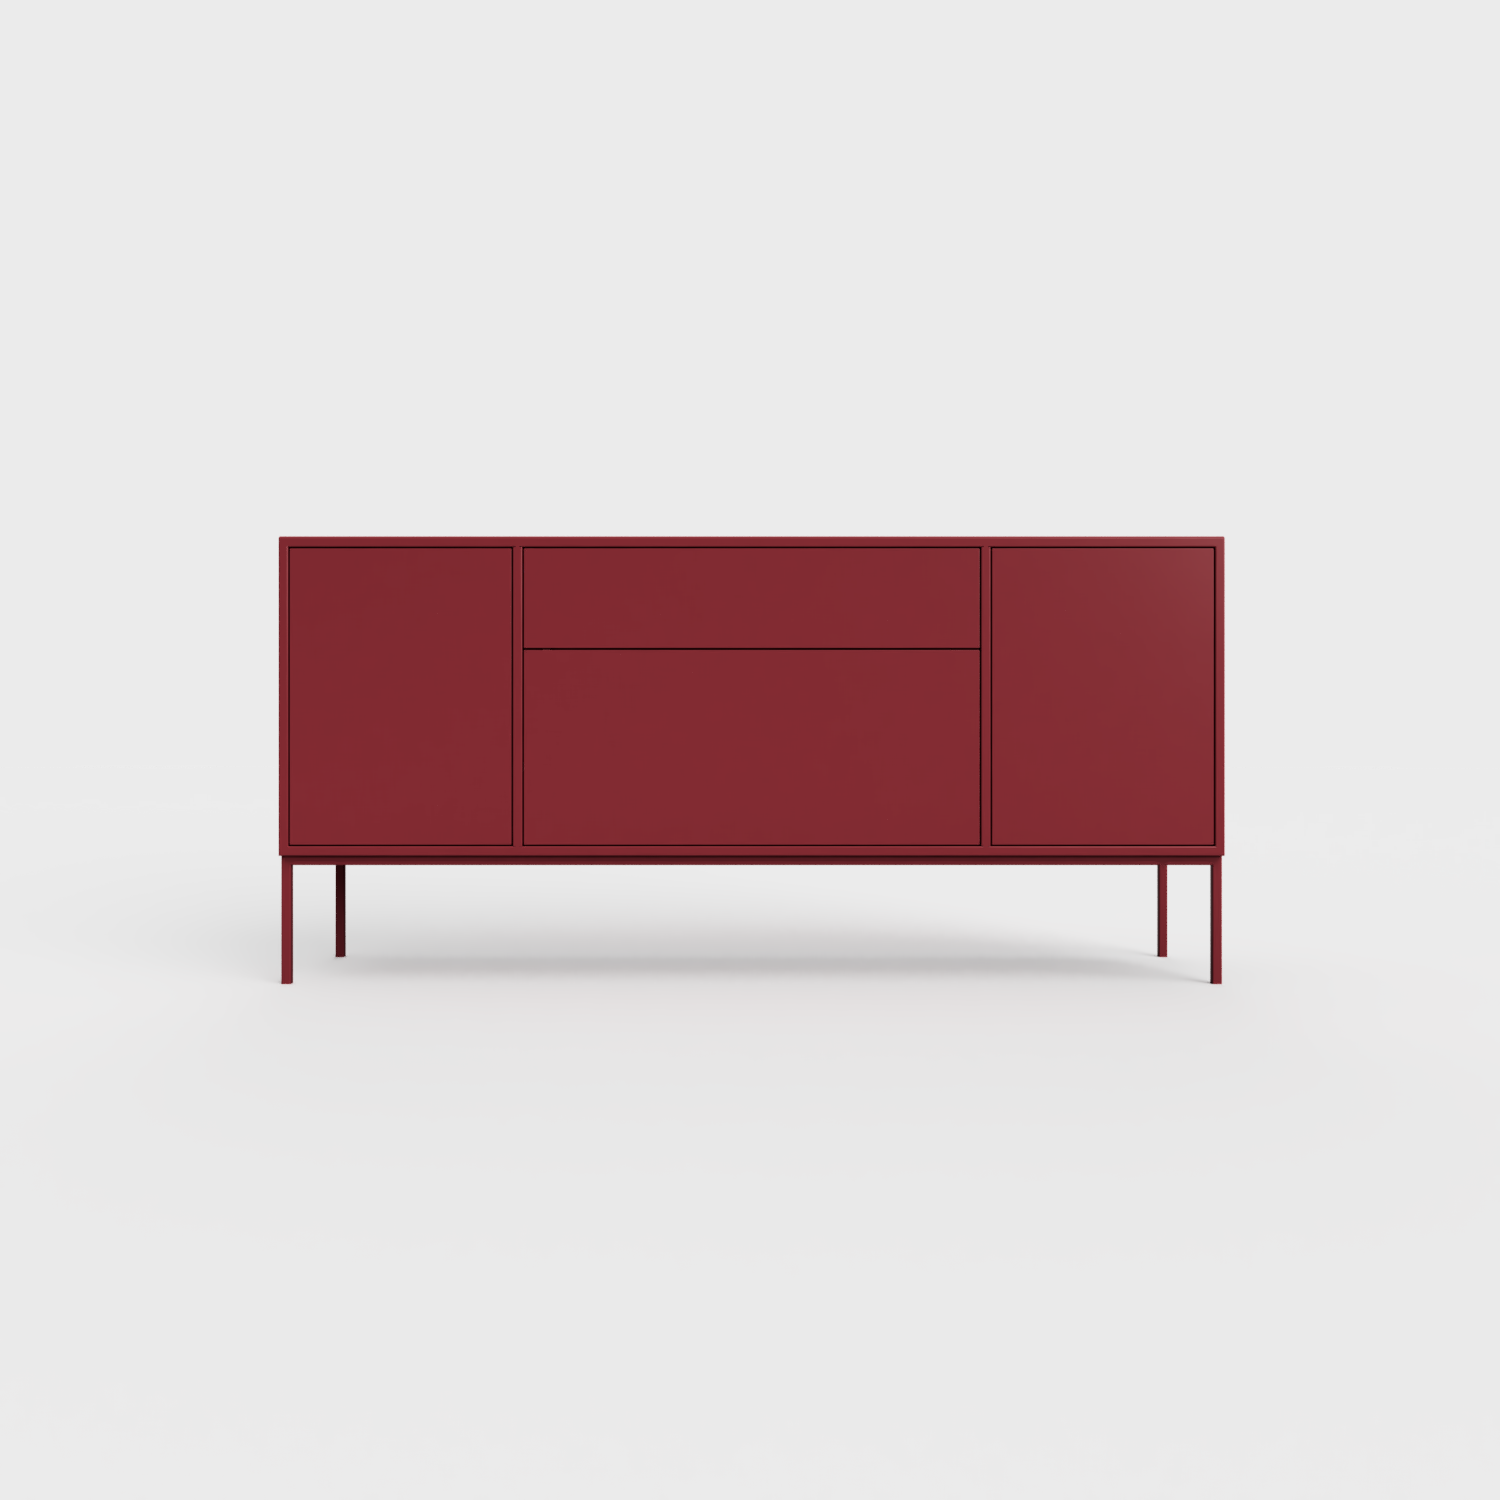 Arnika 02 Sideboard in Ruby color, powder-coated steel, elegant and modern piece of furniture for your living room